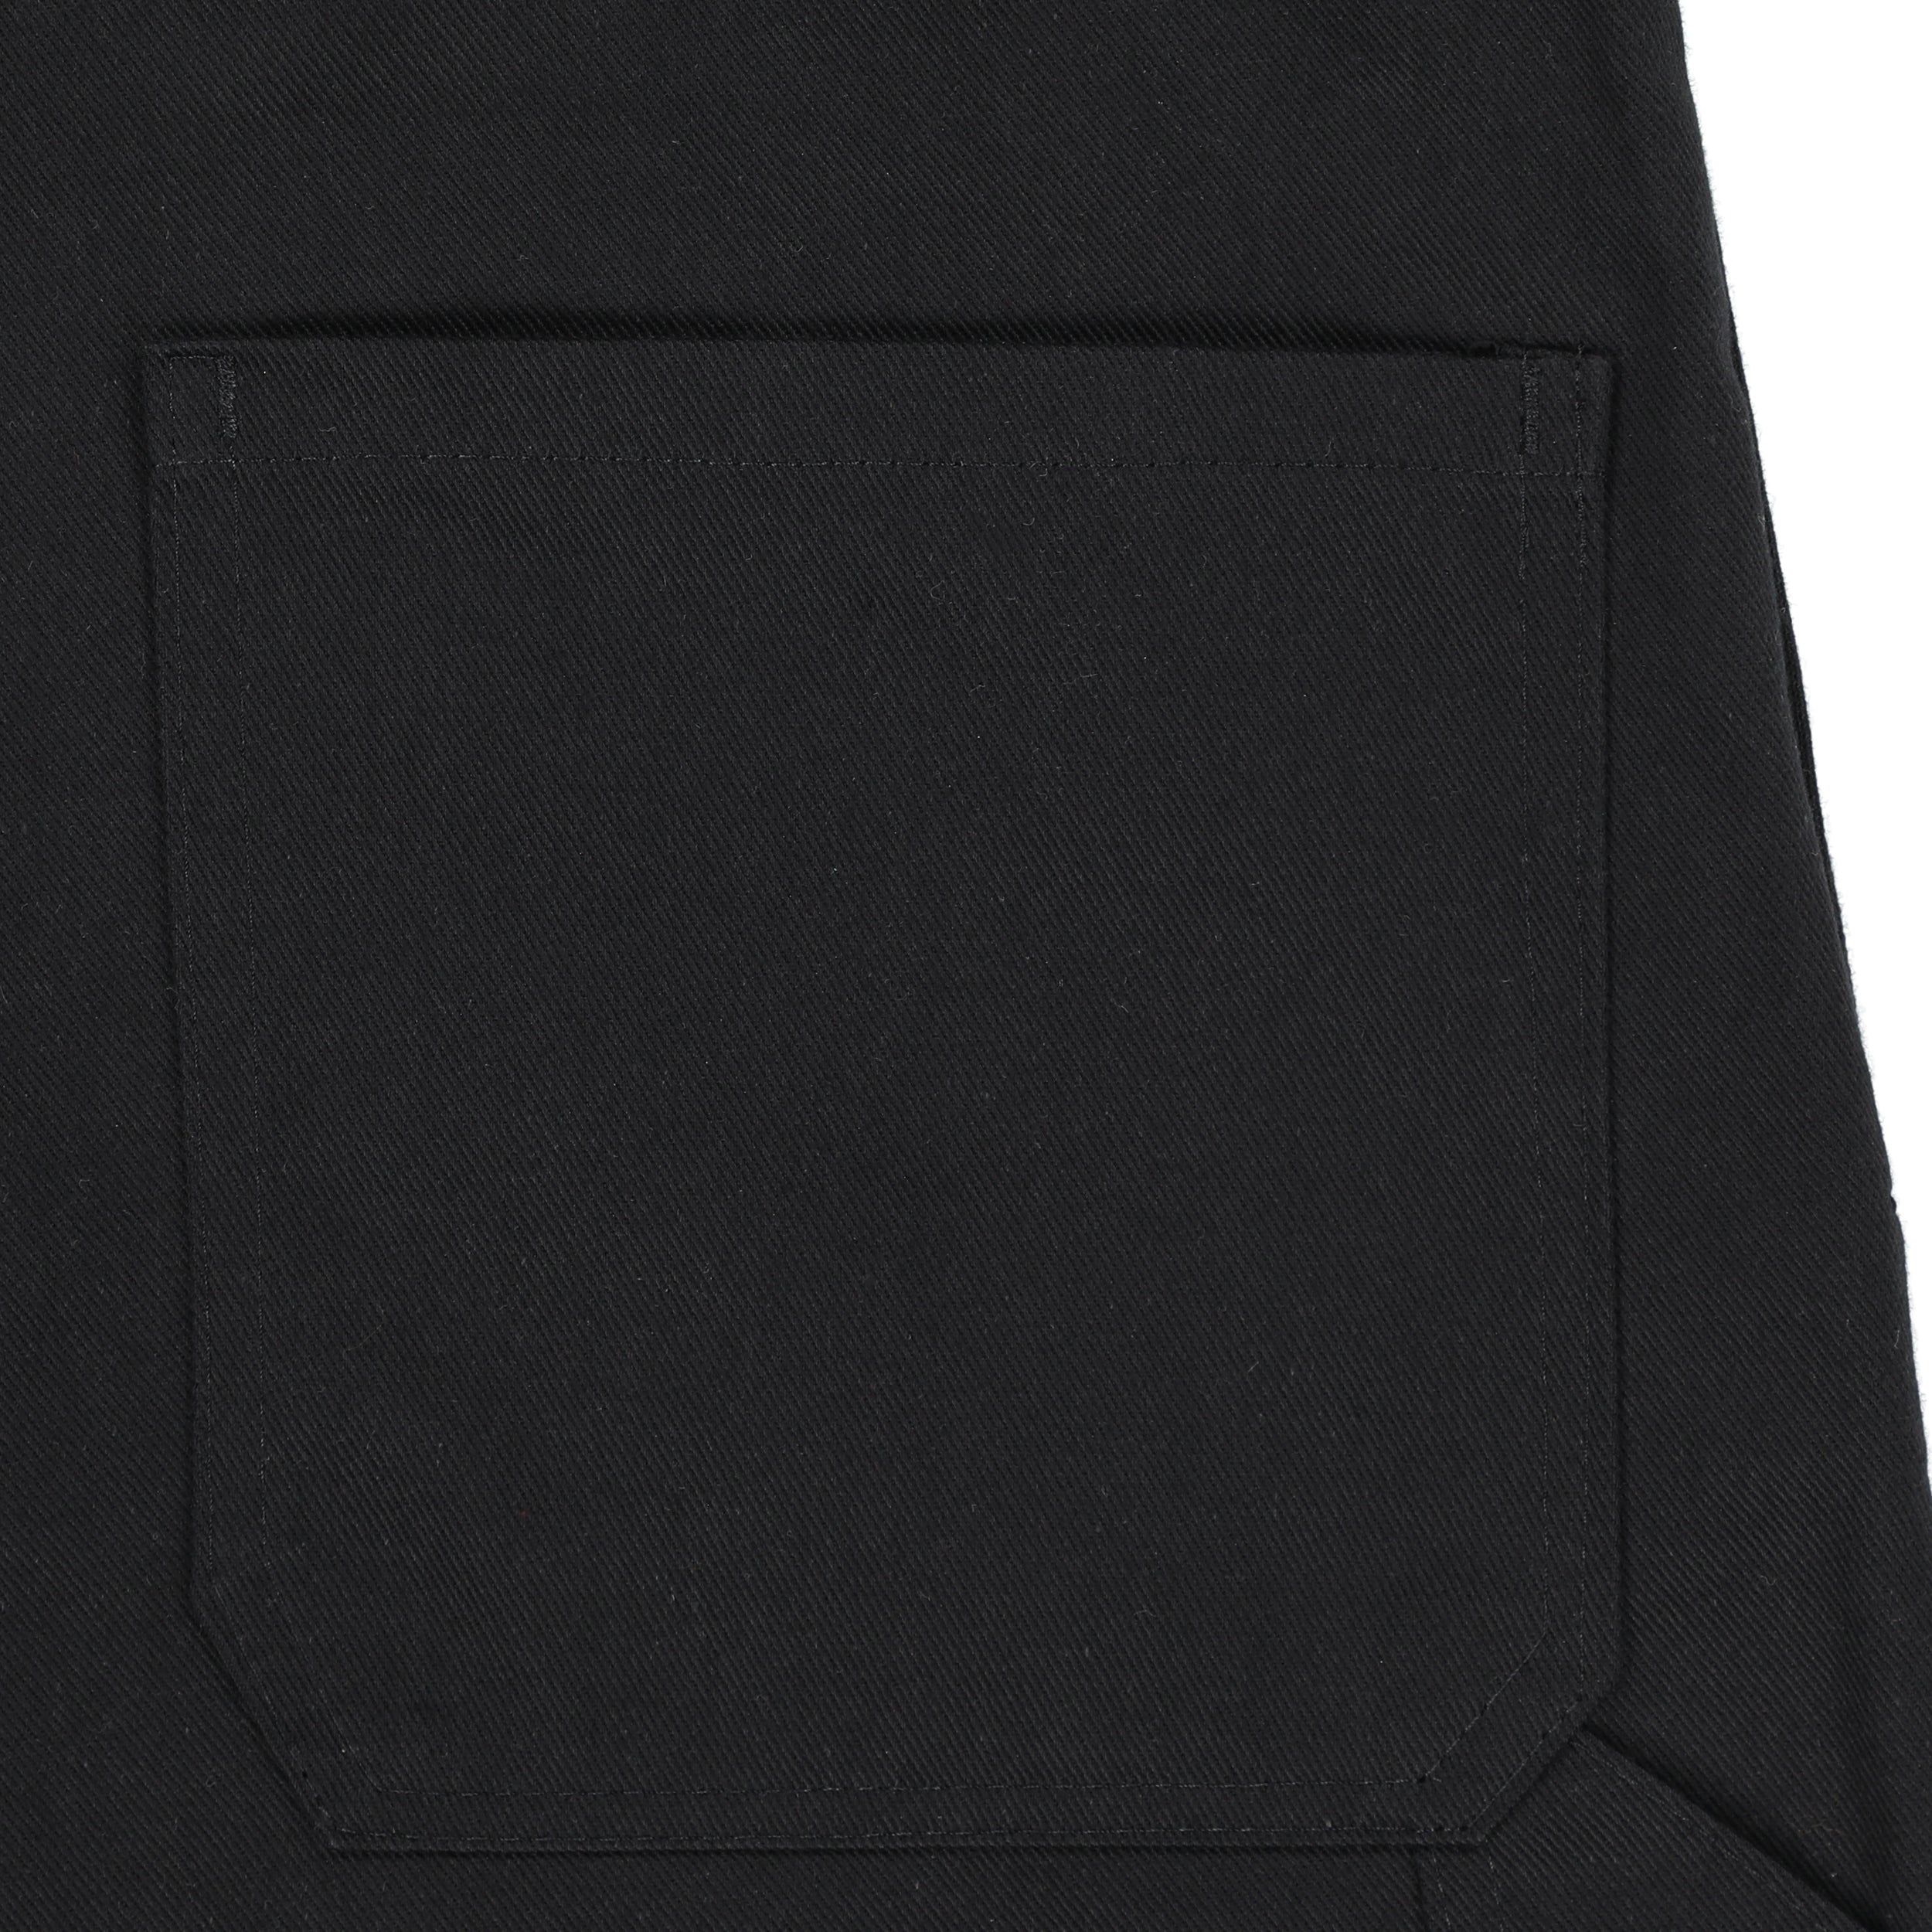 Close up of the pocket detail on the Carrier Company Men's Dungarees in Black